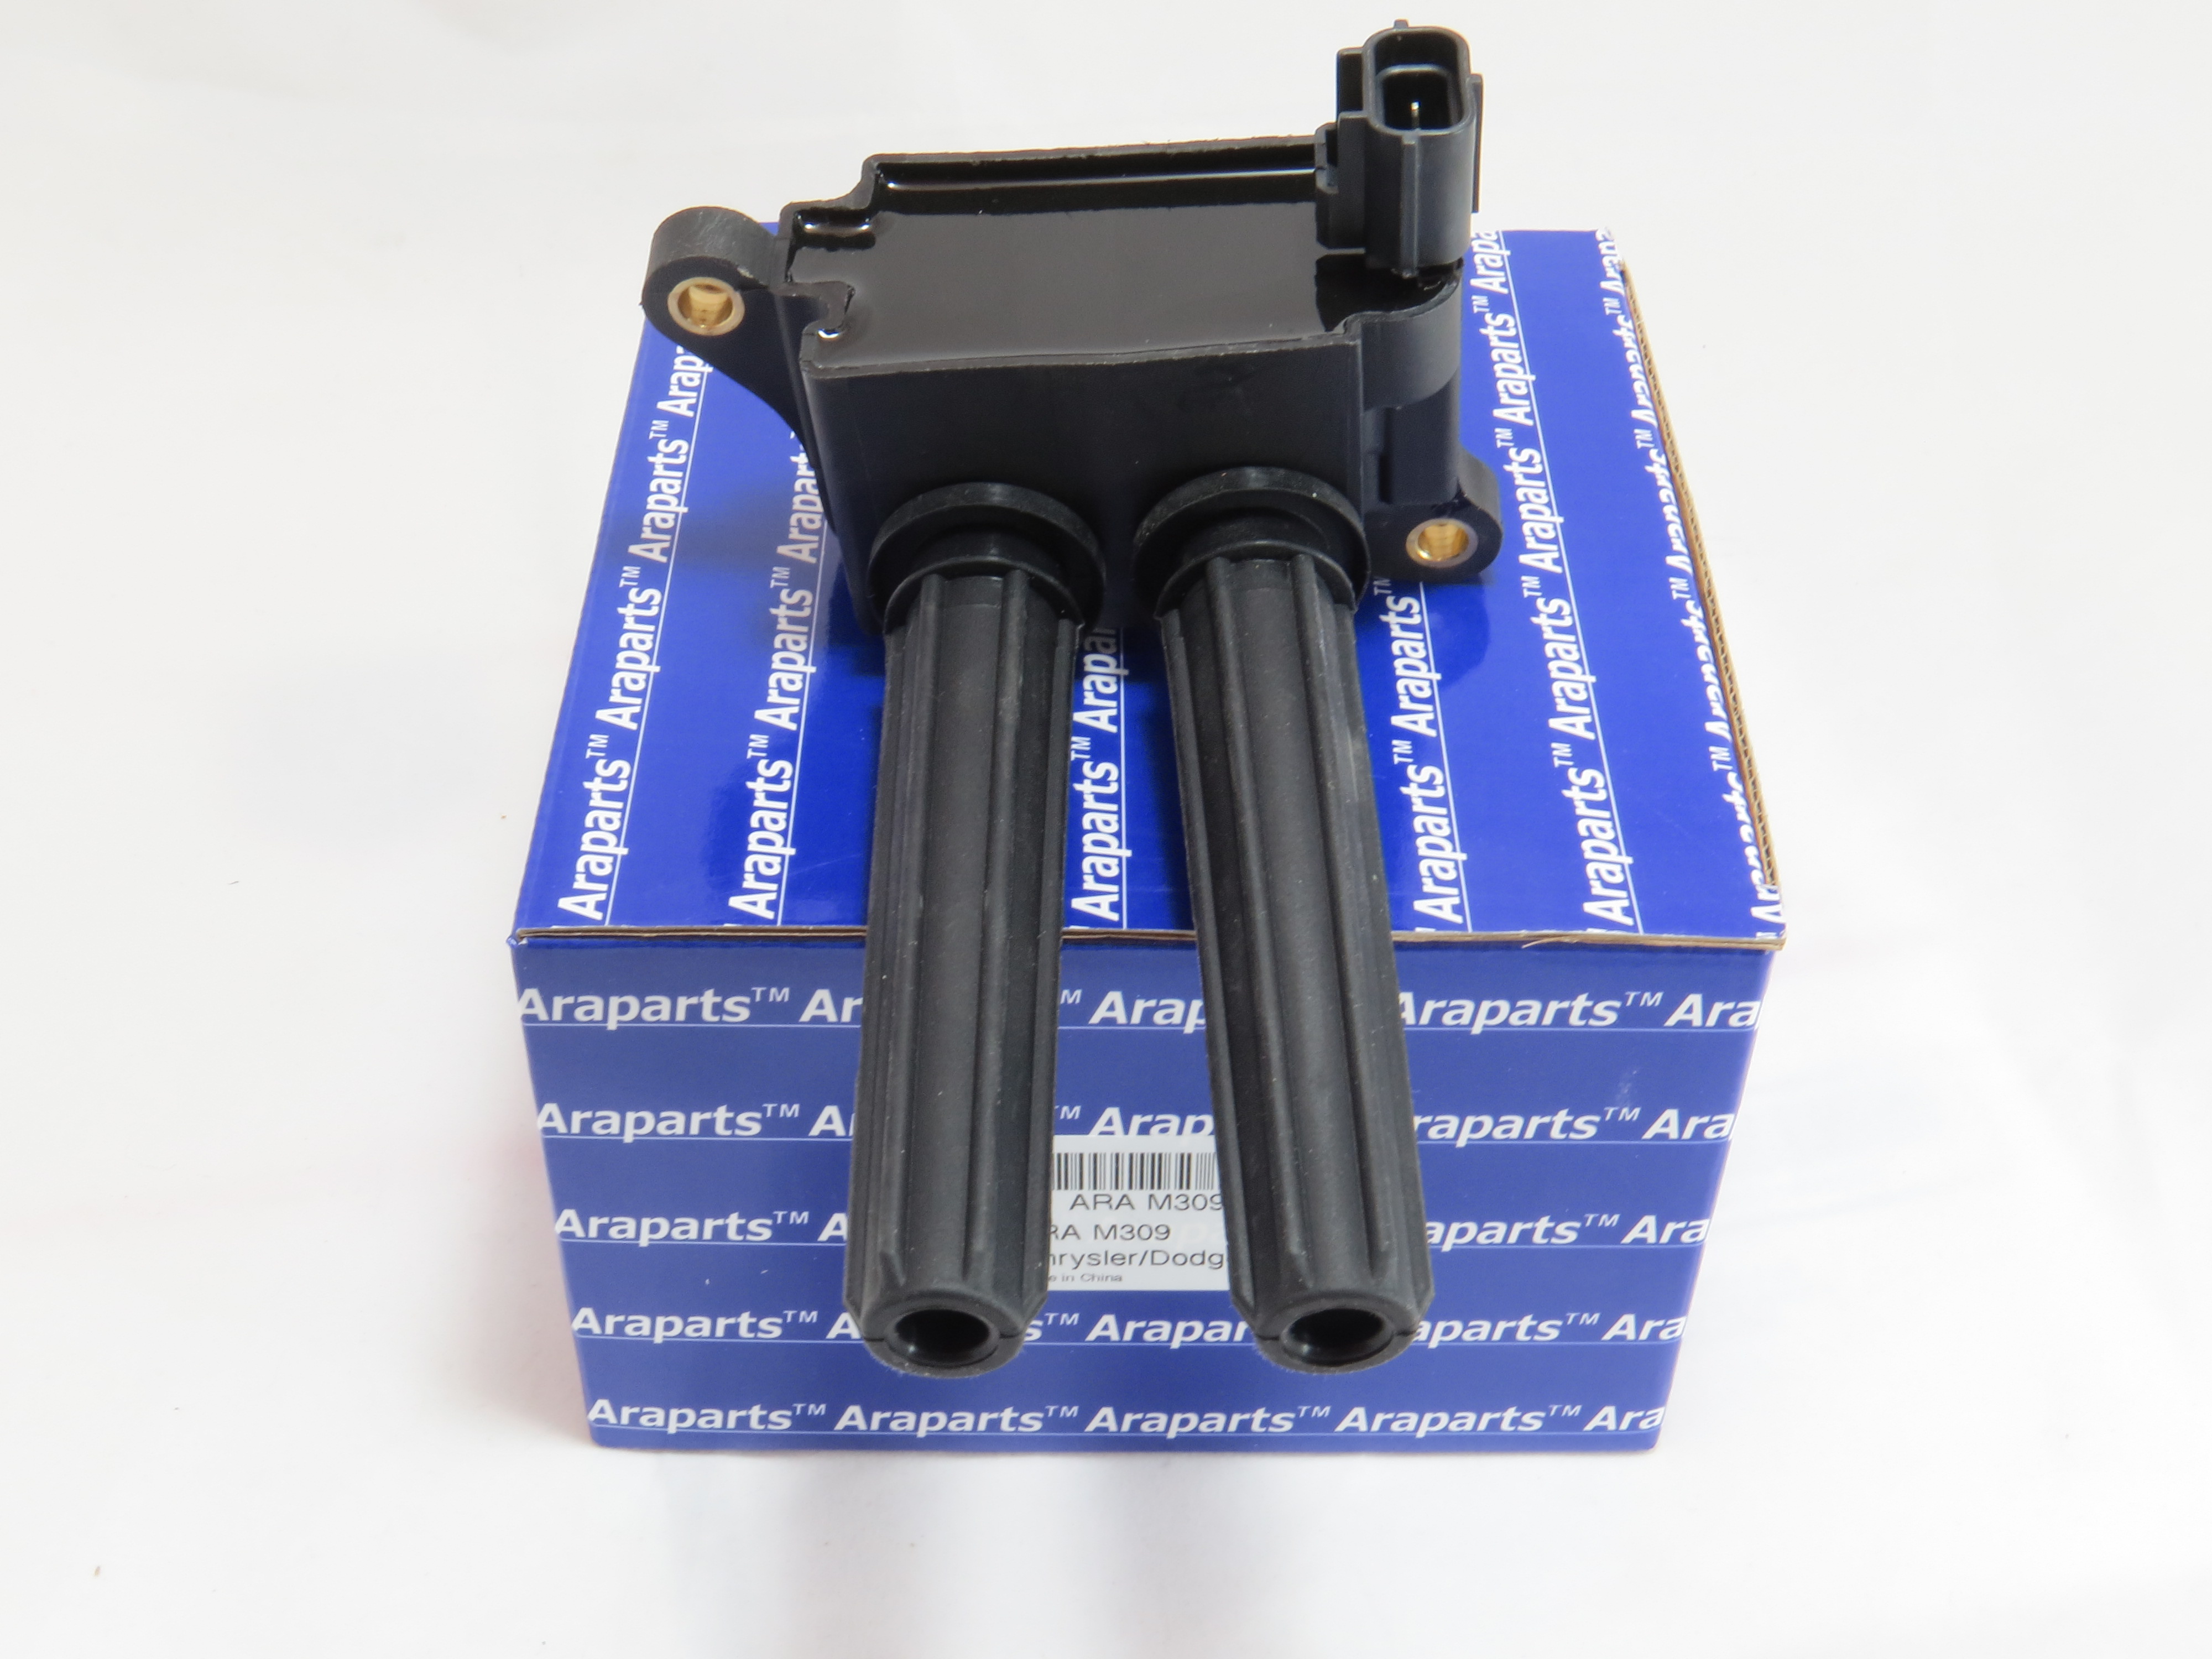 Ignition Coil for Chrysler 300 with the 5.7L Hemi V8. This engine uses 2 spark plugs per cylinder  